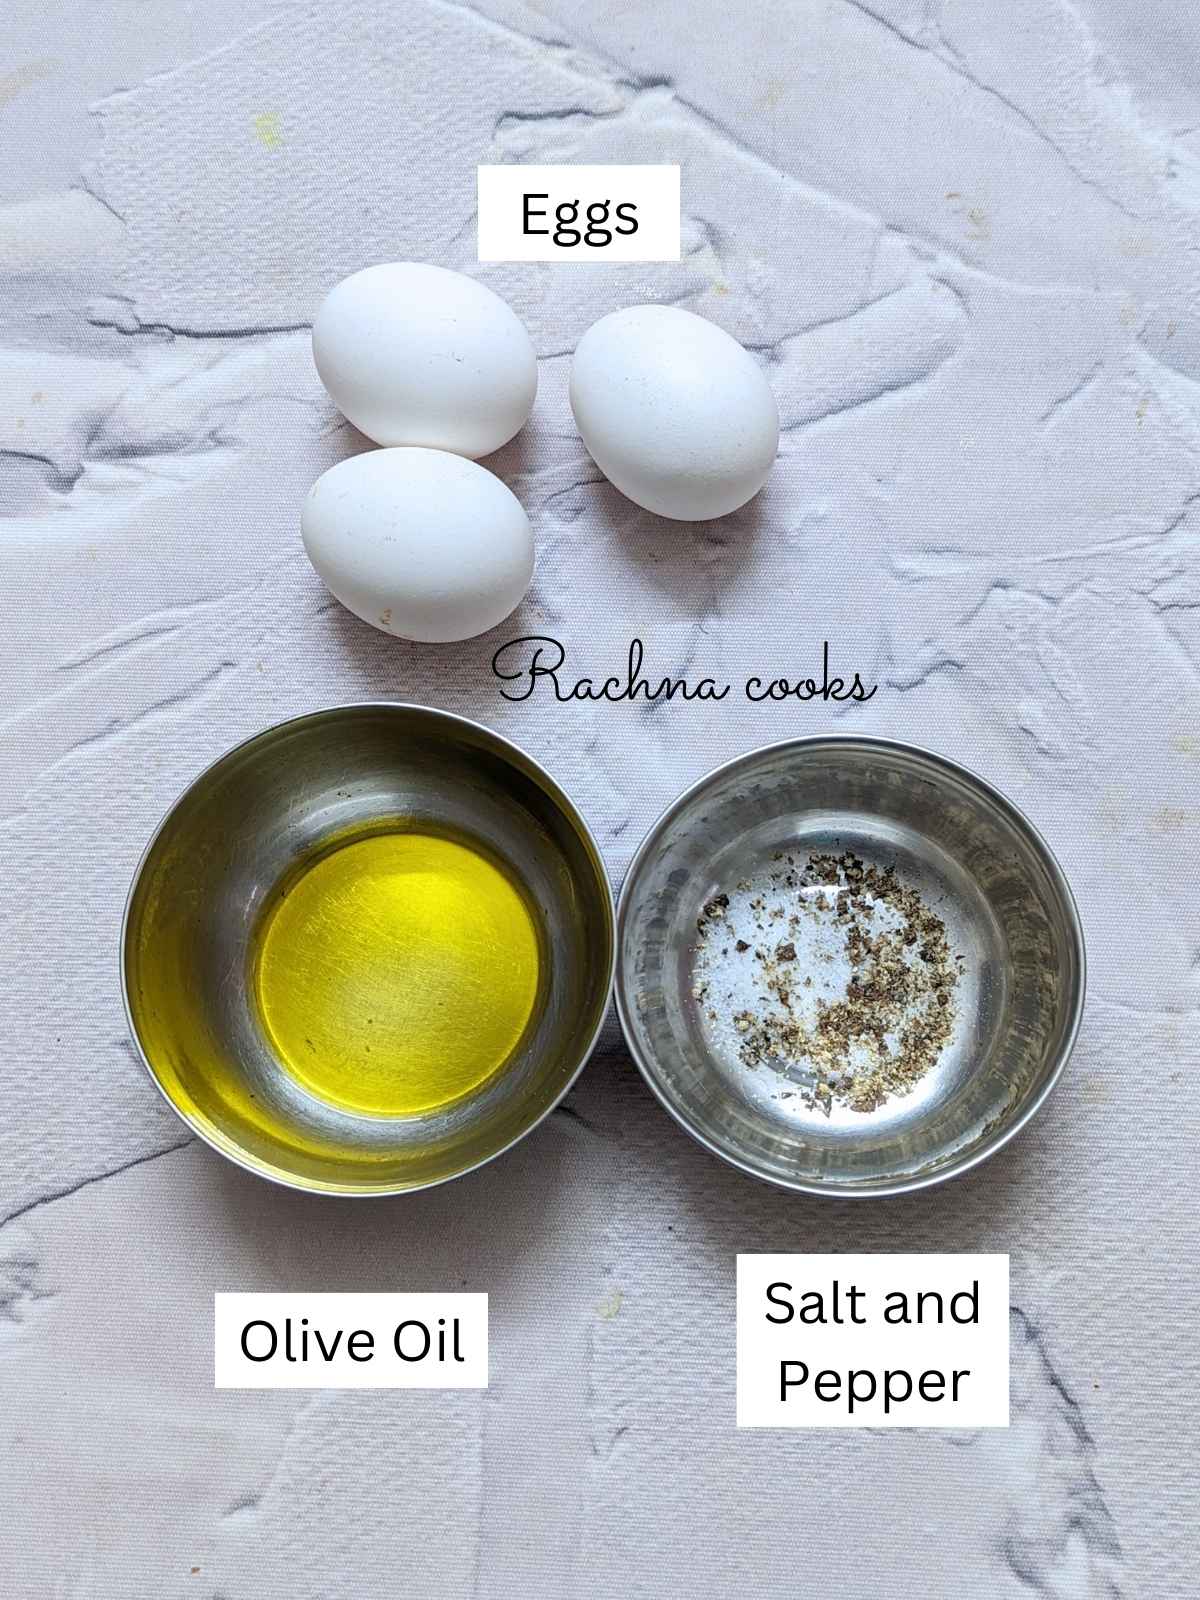 Eggs, salt and pepper and olive oil as ingredients.